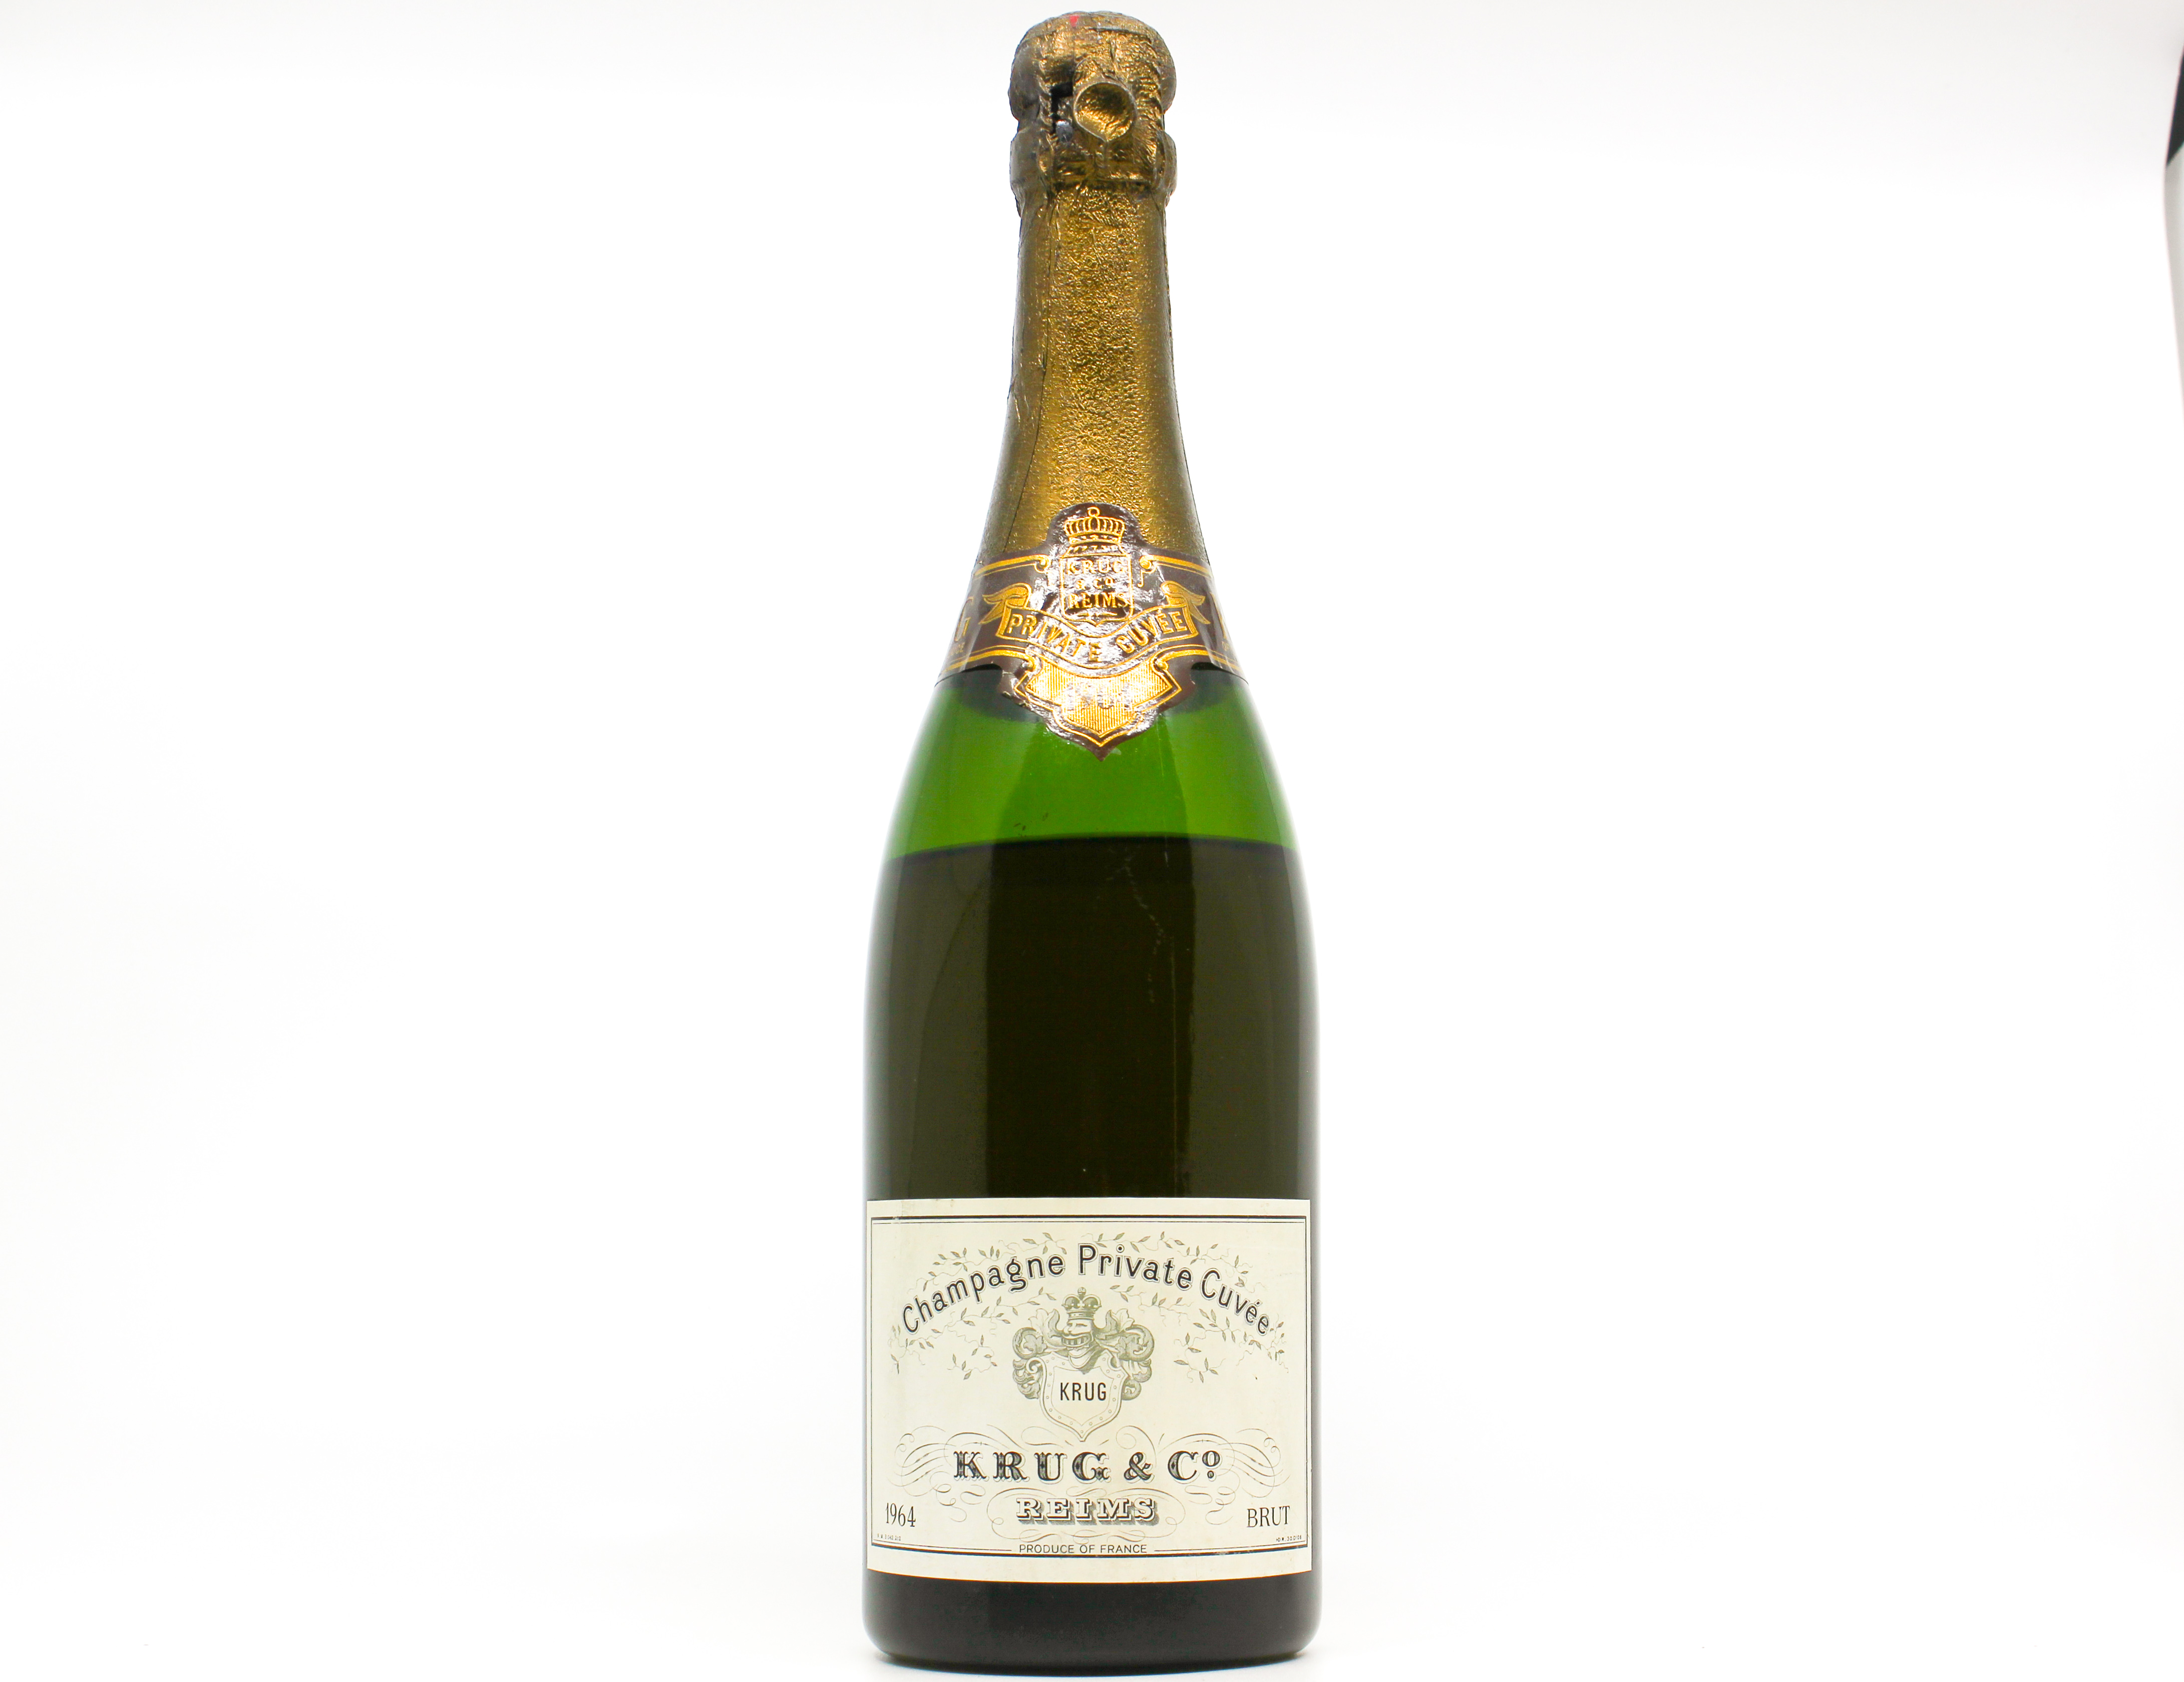 1964 Krug & Co Champagne Private Cuvée - Image 8 of 8